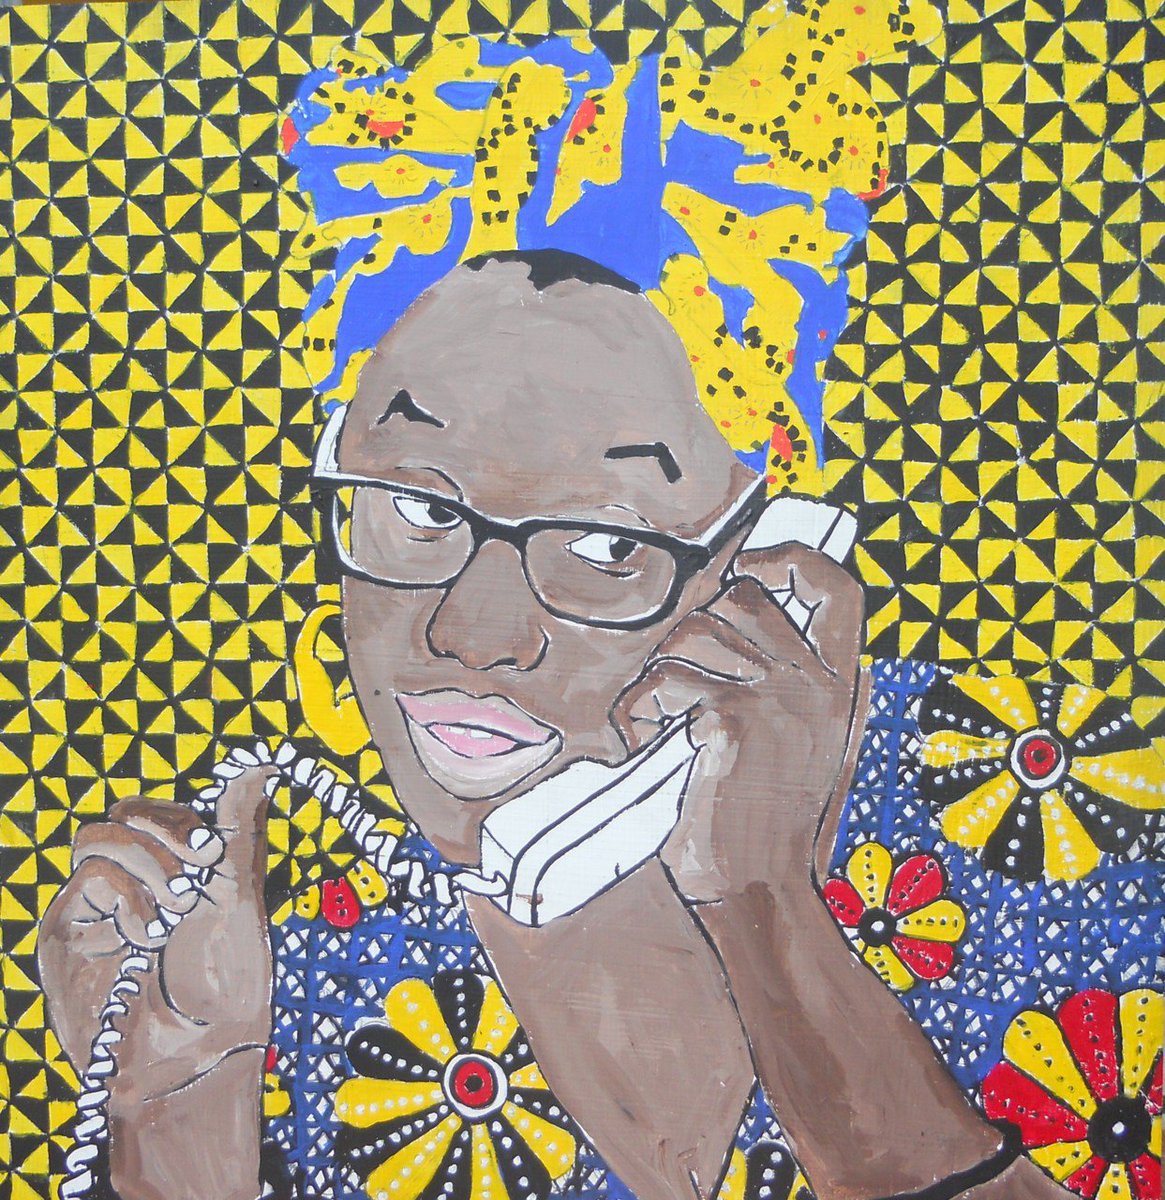 Sheena Rose, Caribbean artist from Barbados who works with hand drawn animations, paintings, drawings, performance art #womensart